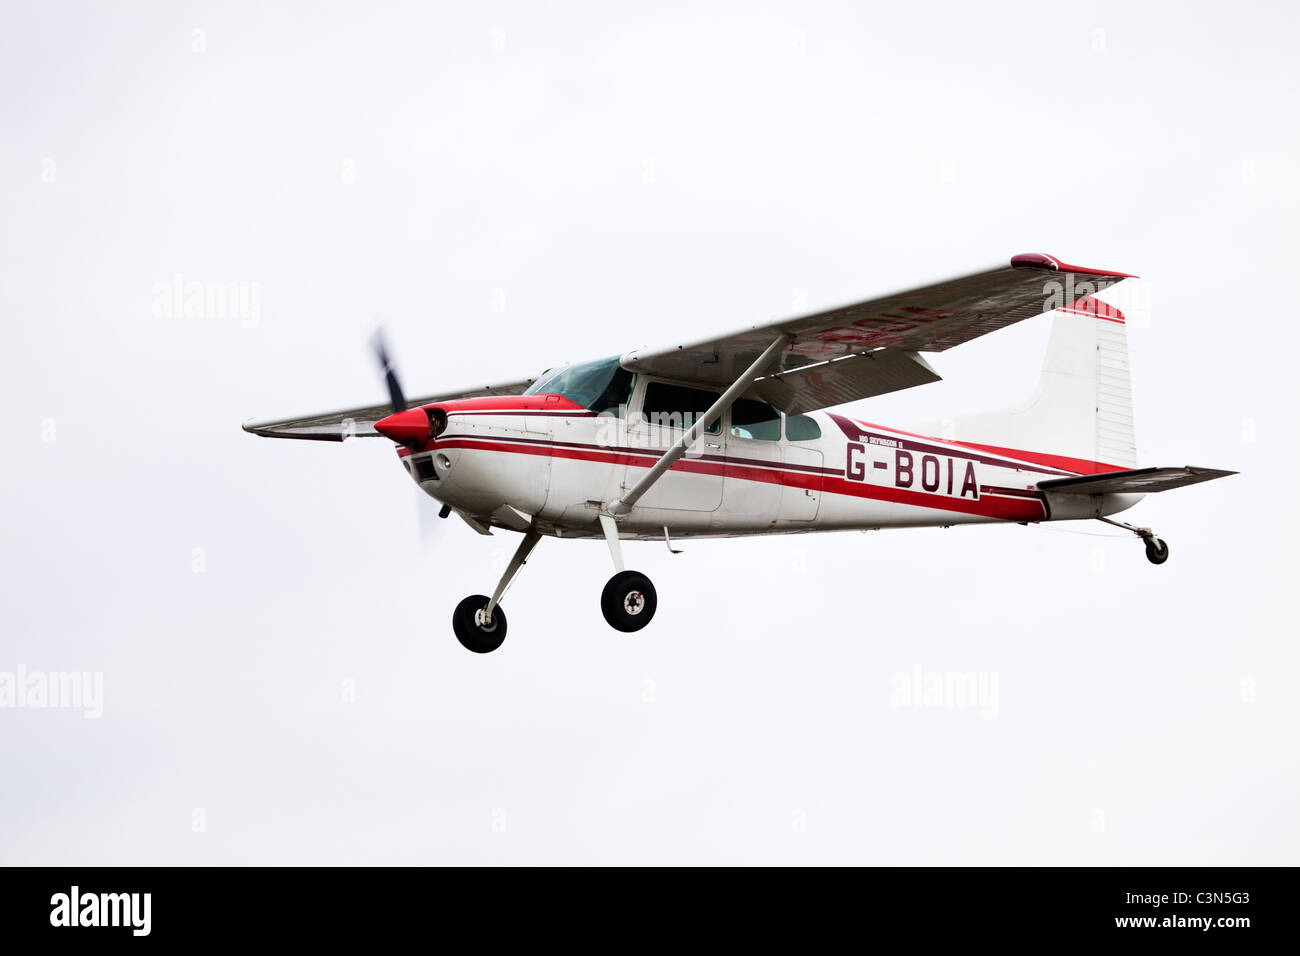 Cessna 180K Skywagon G-BOIA II in flight on final approach to land at Sandtoft Airfield Stock Photo